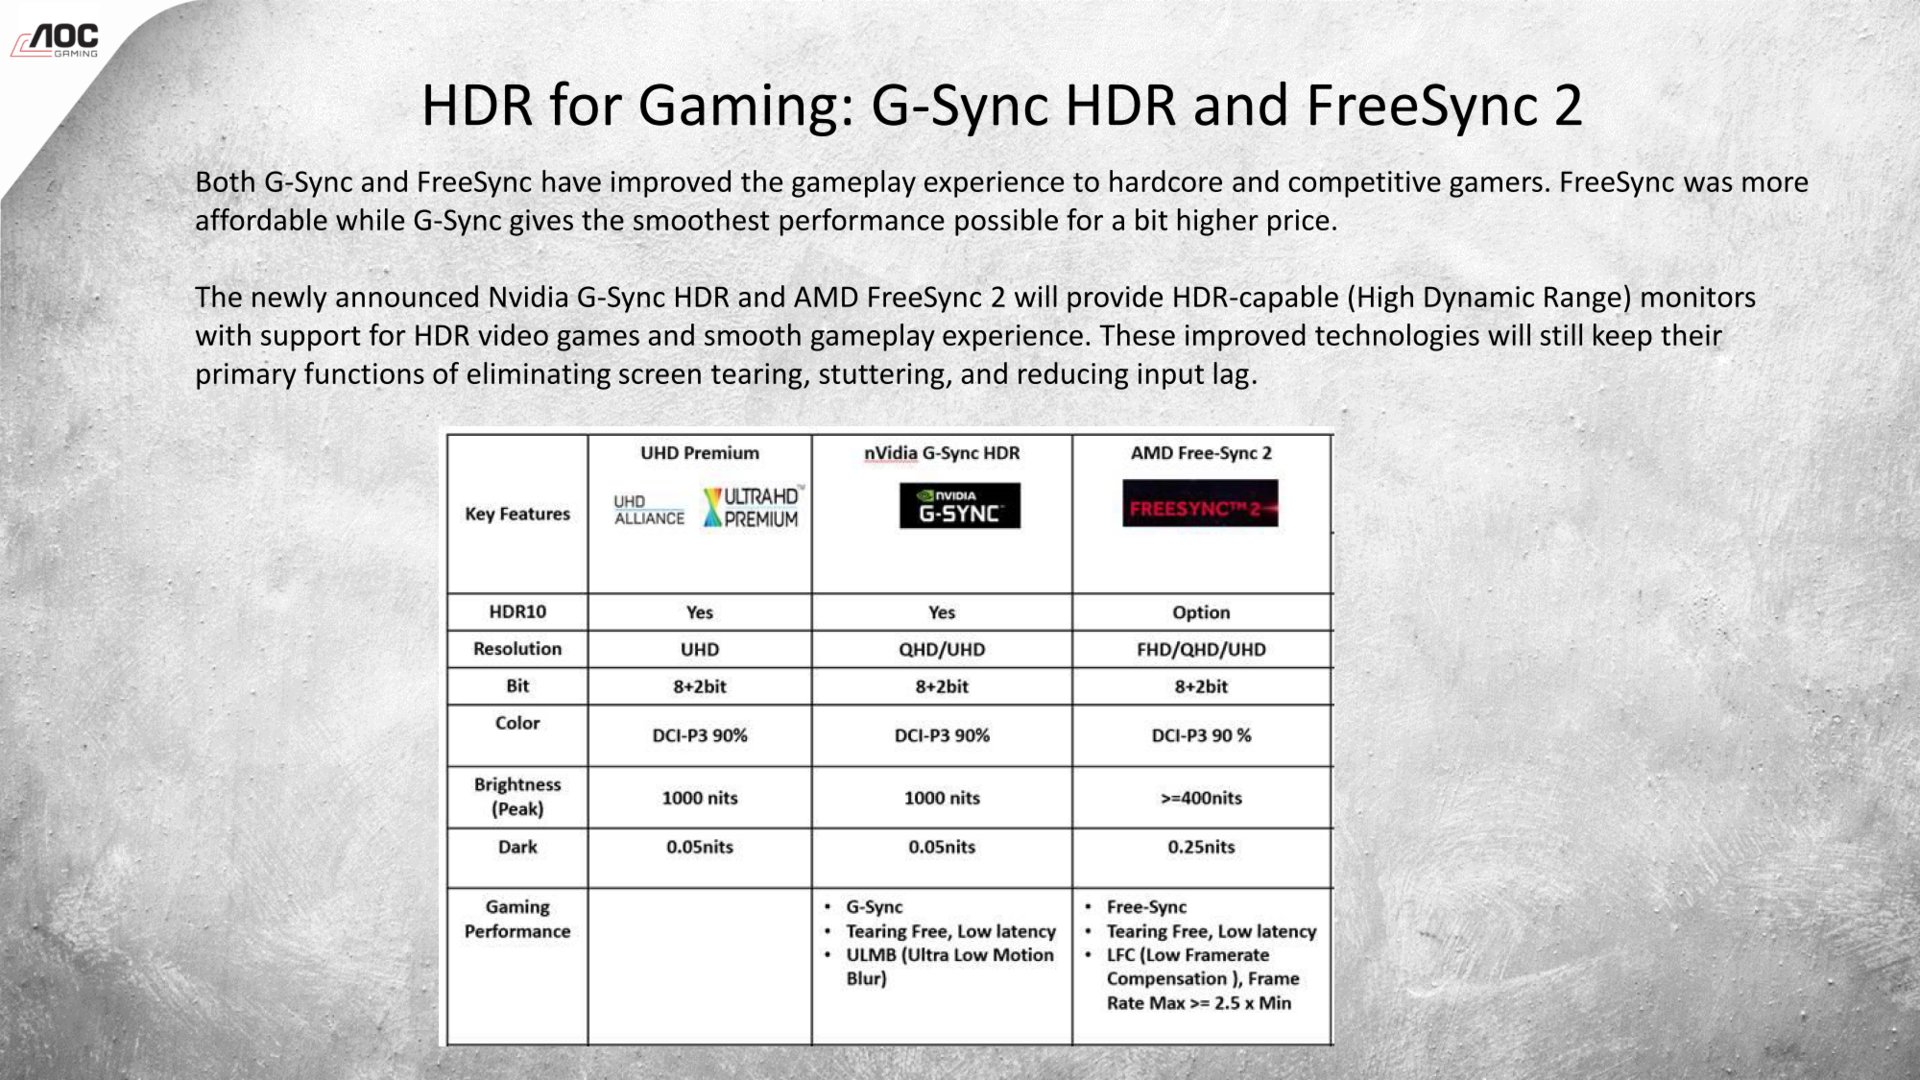 HDR-Support mit G-Sync HDR und FreeSync 2